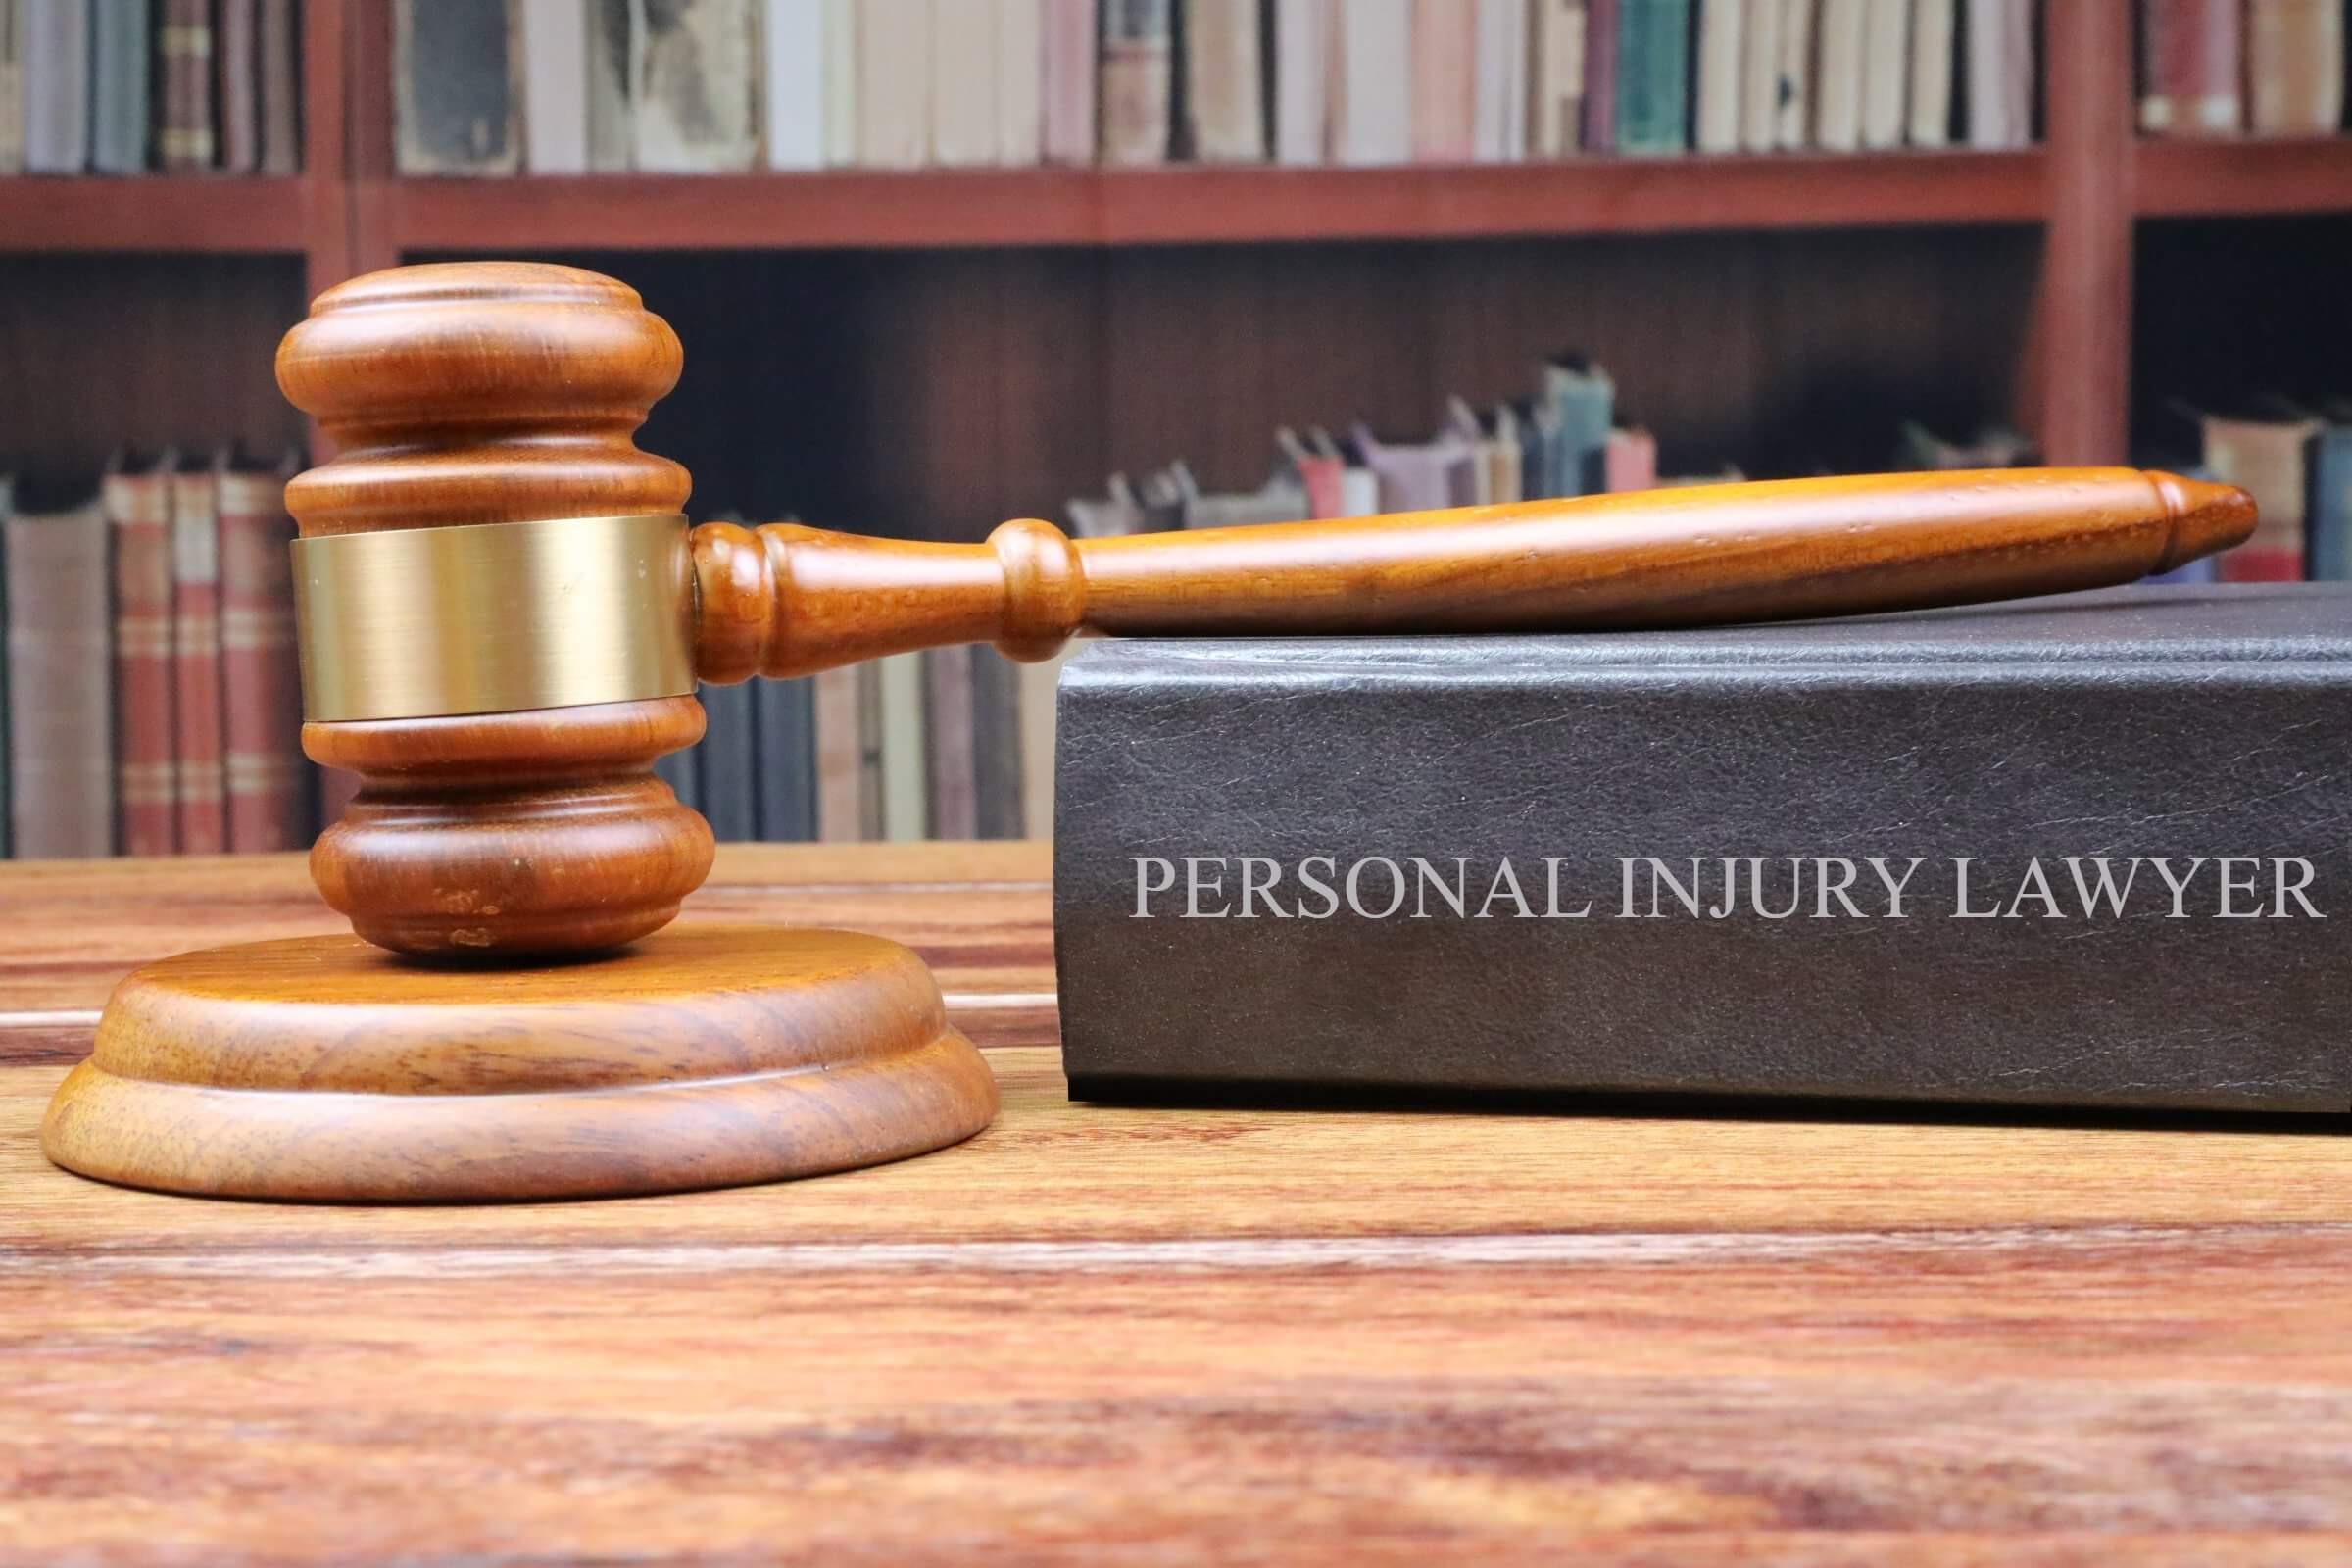 Best Personal Injury Lawyer in Tulsa, Oklahoma